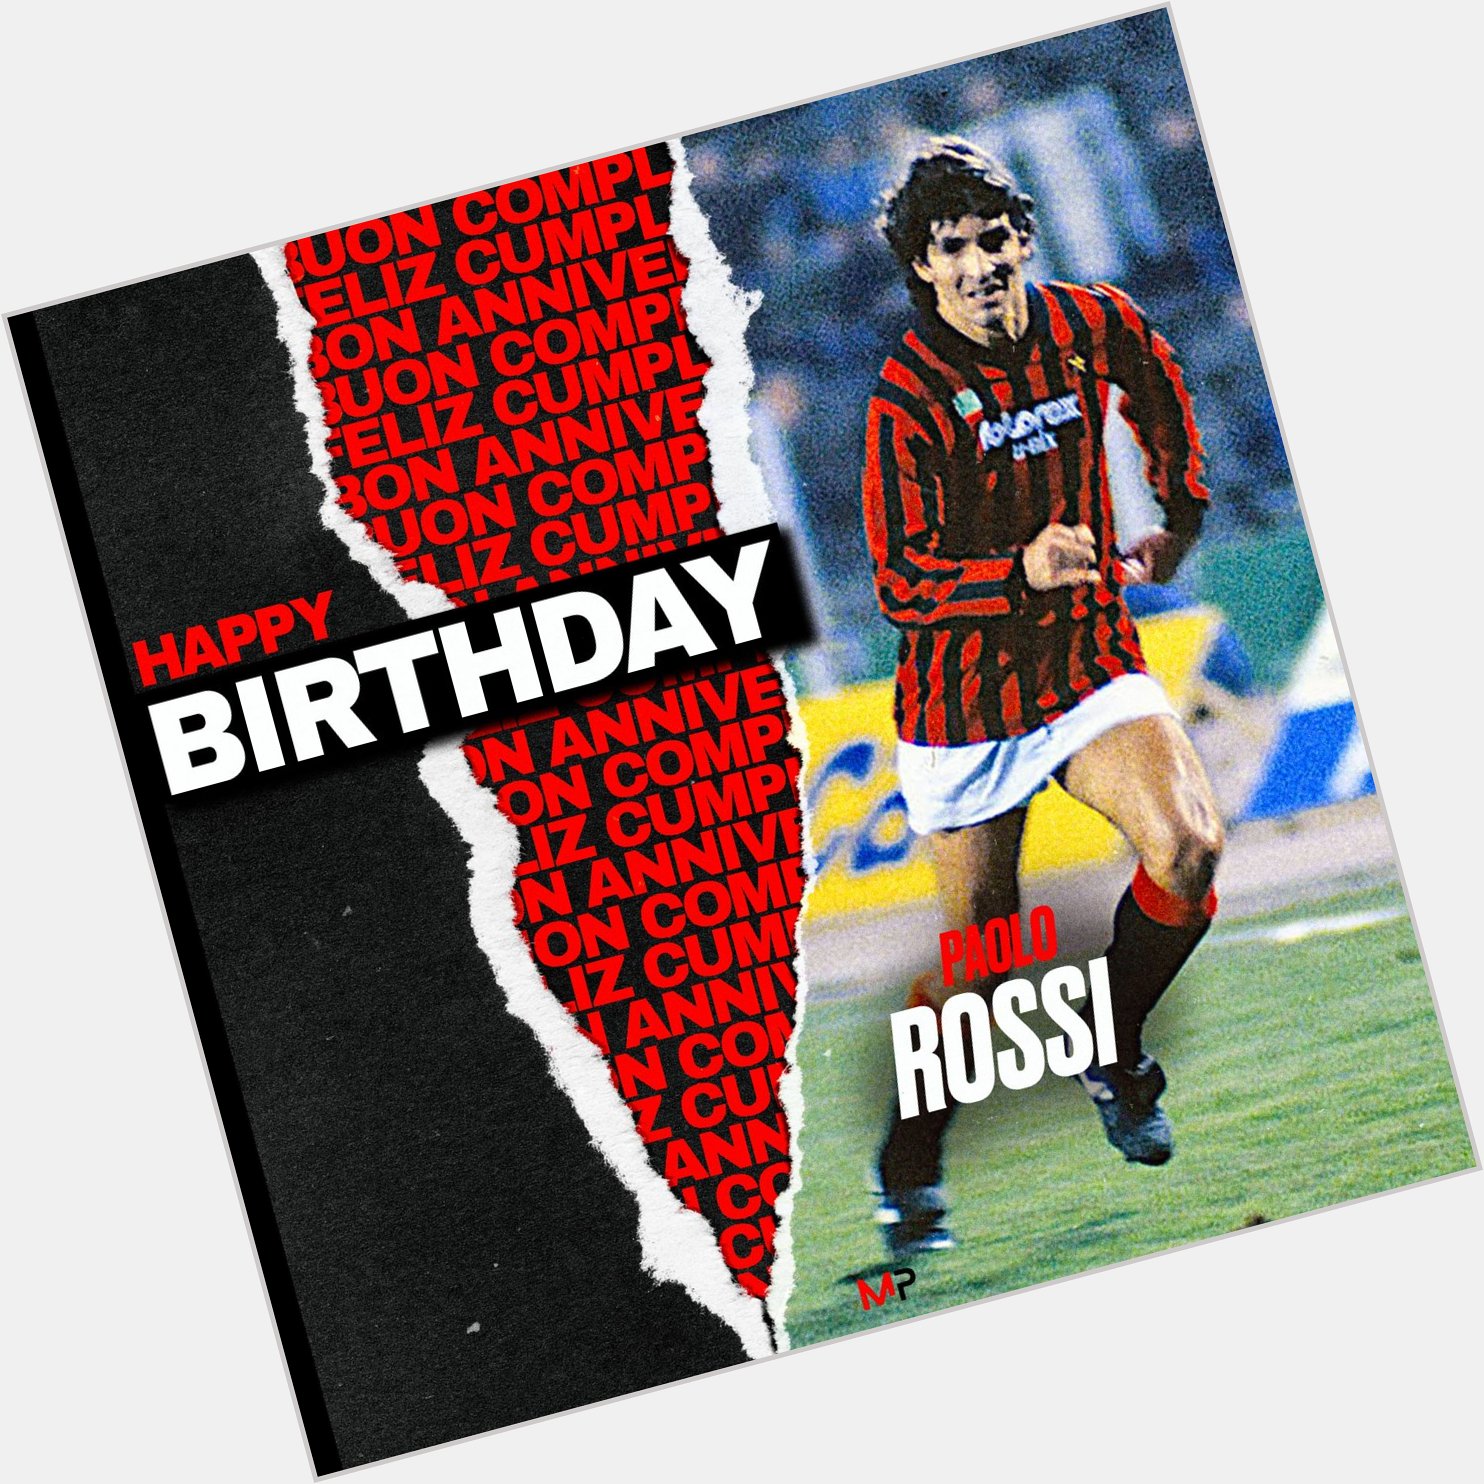  Happy Birthday Paolo Rossi    26 Appearances  03 Goals 02 Assists 